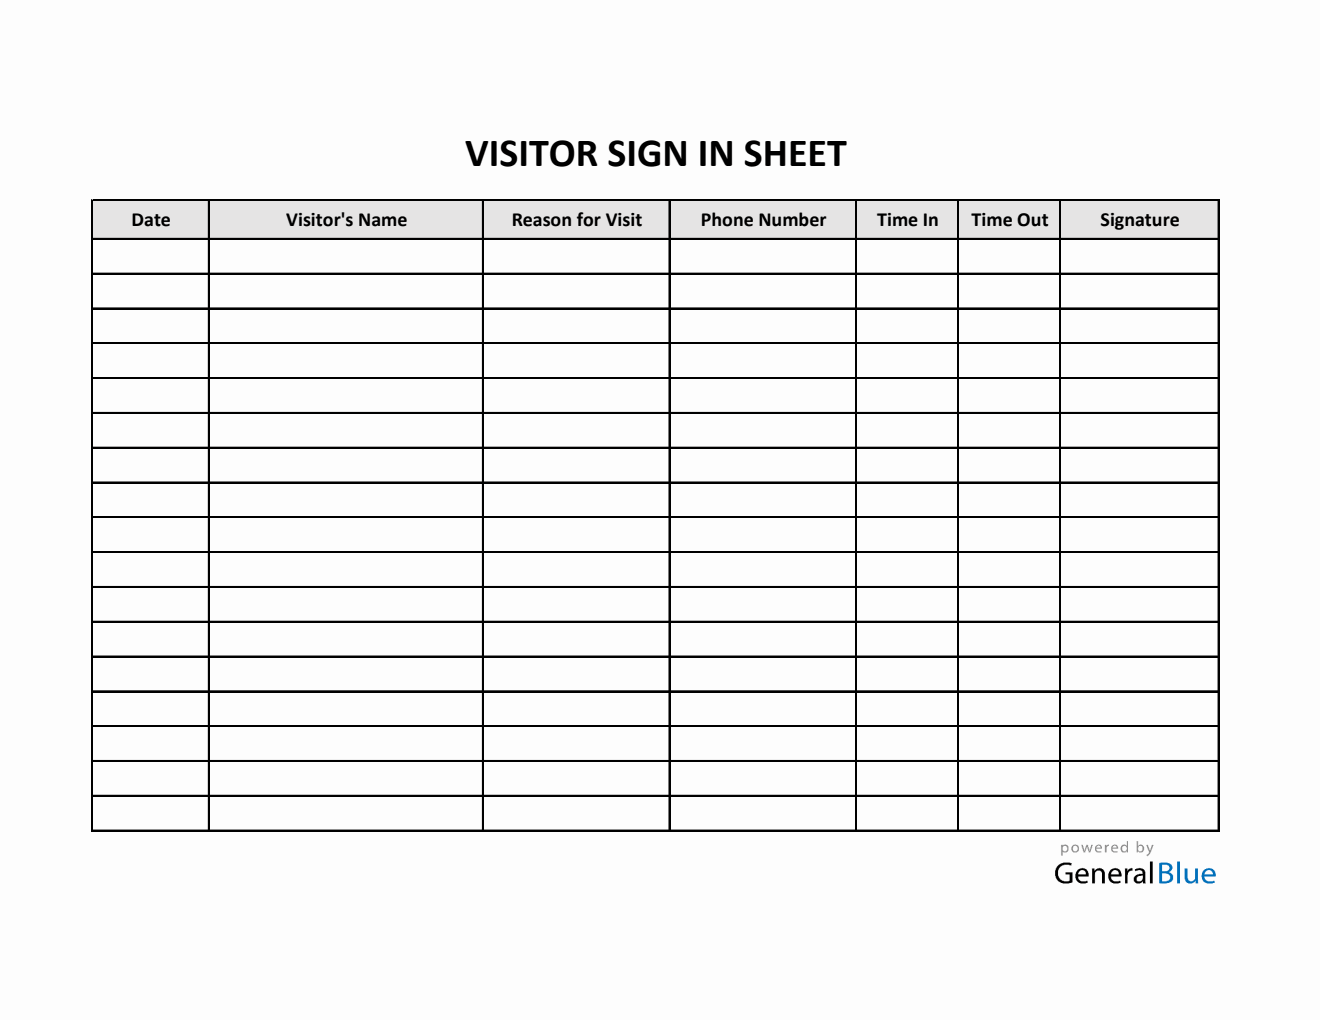  Visitor Sign In Sheet in Excel